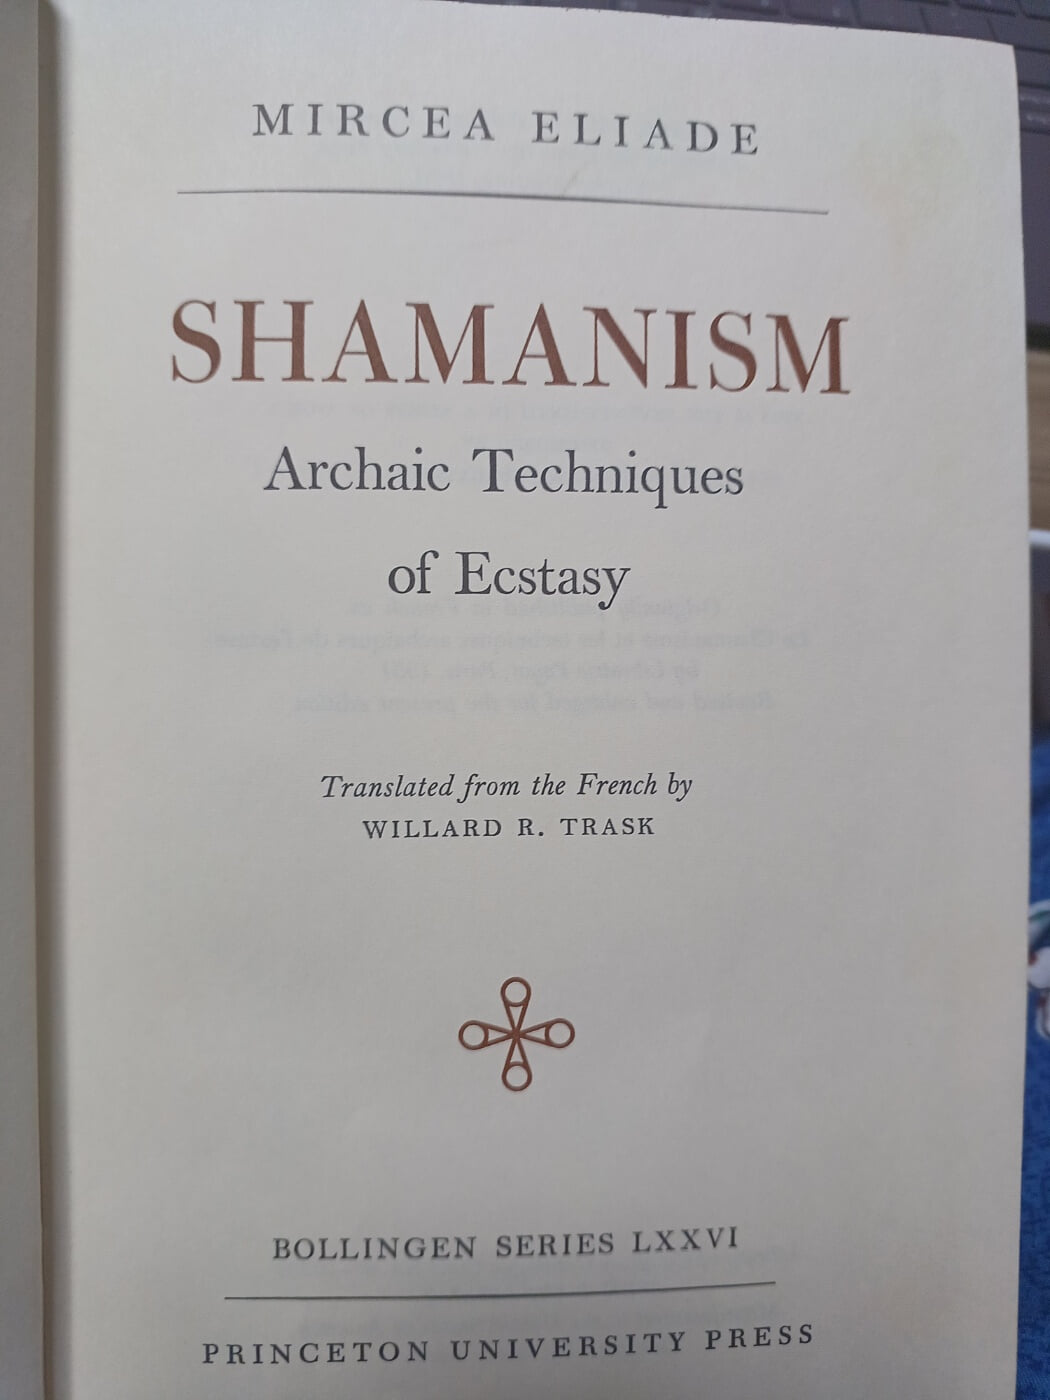 Shamanism: Archaic Techniques of Ecstasy(Hardcover)